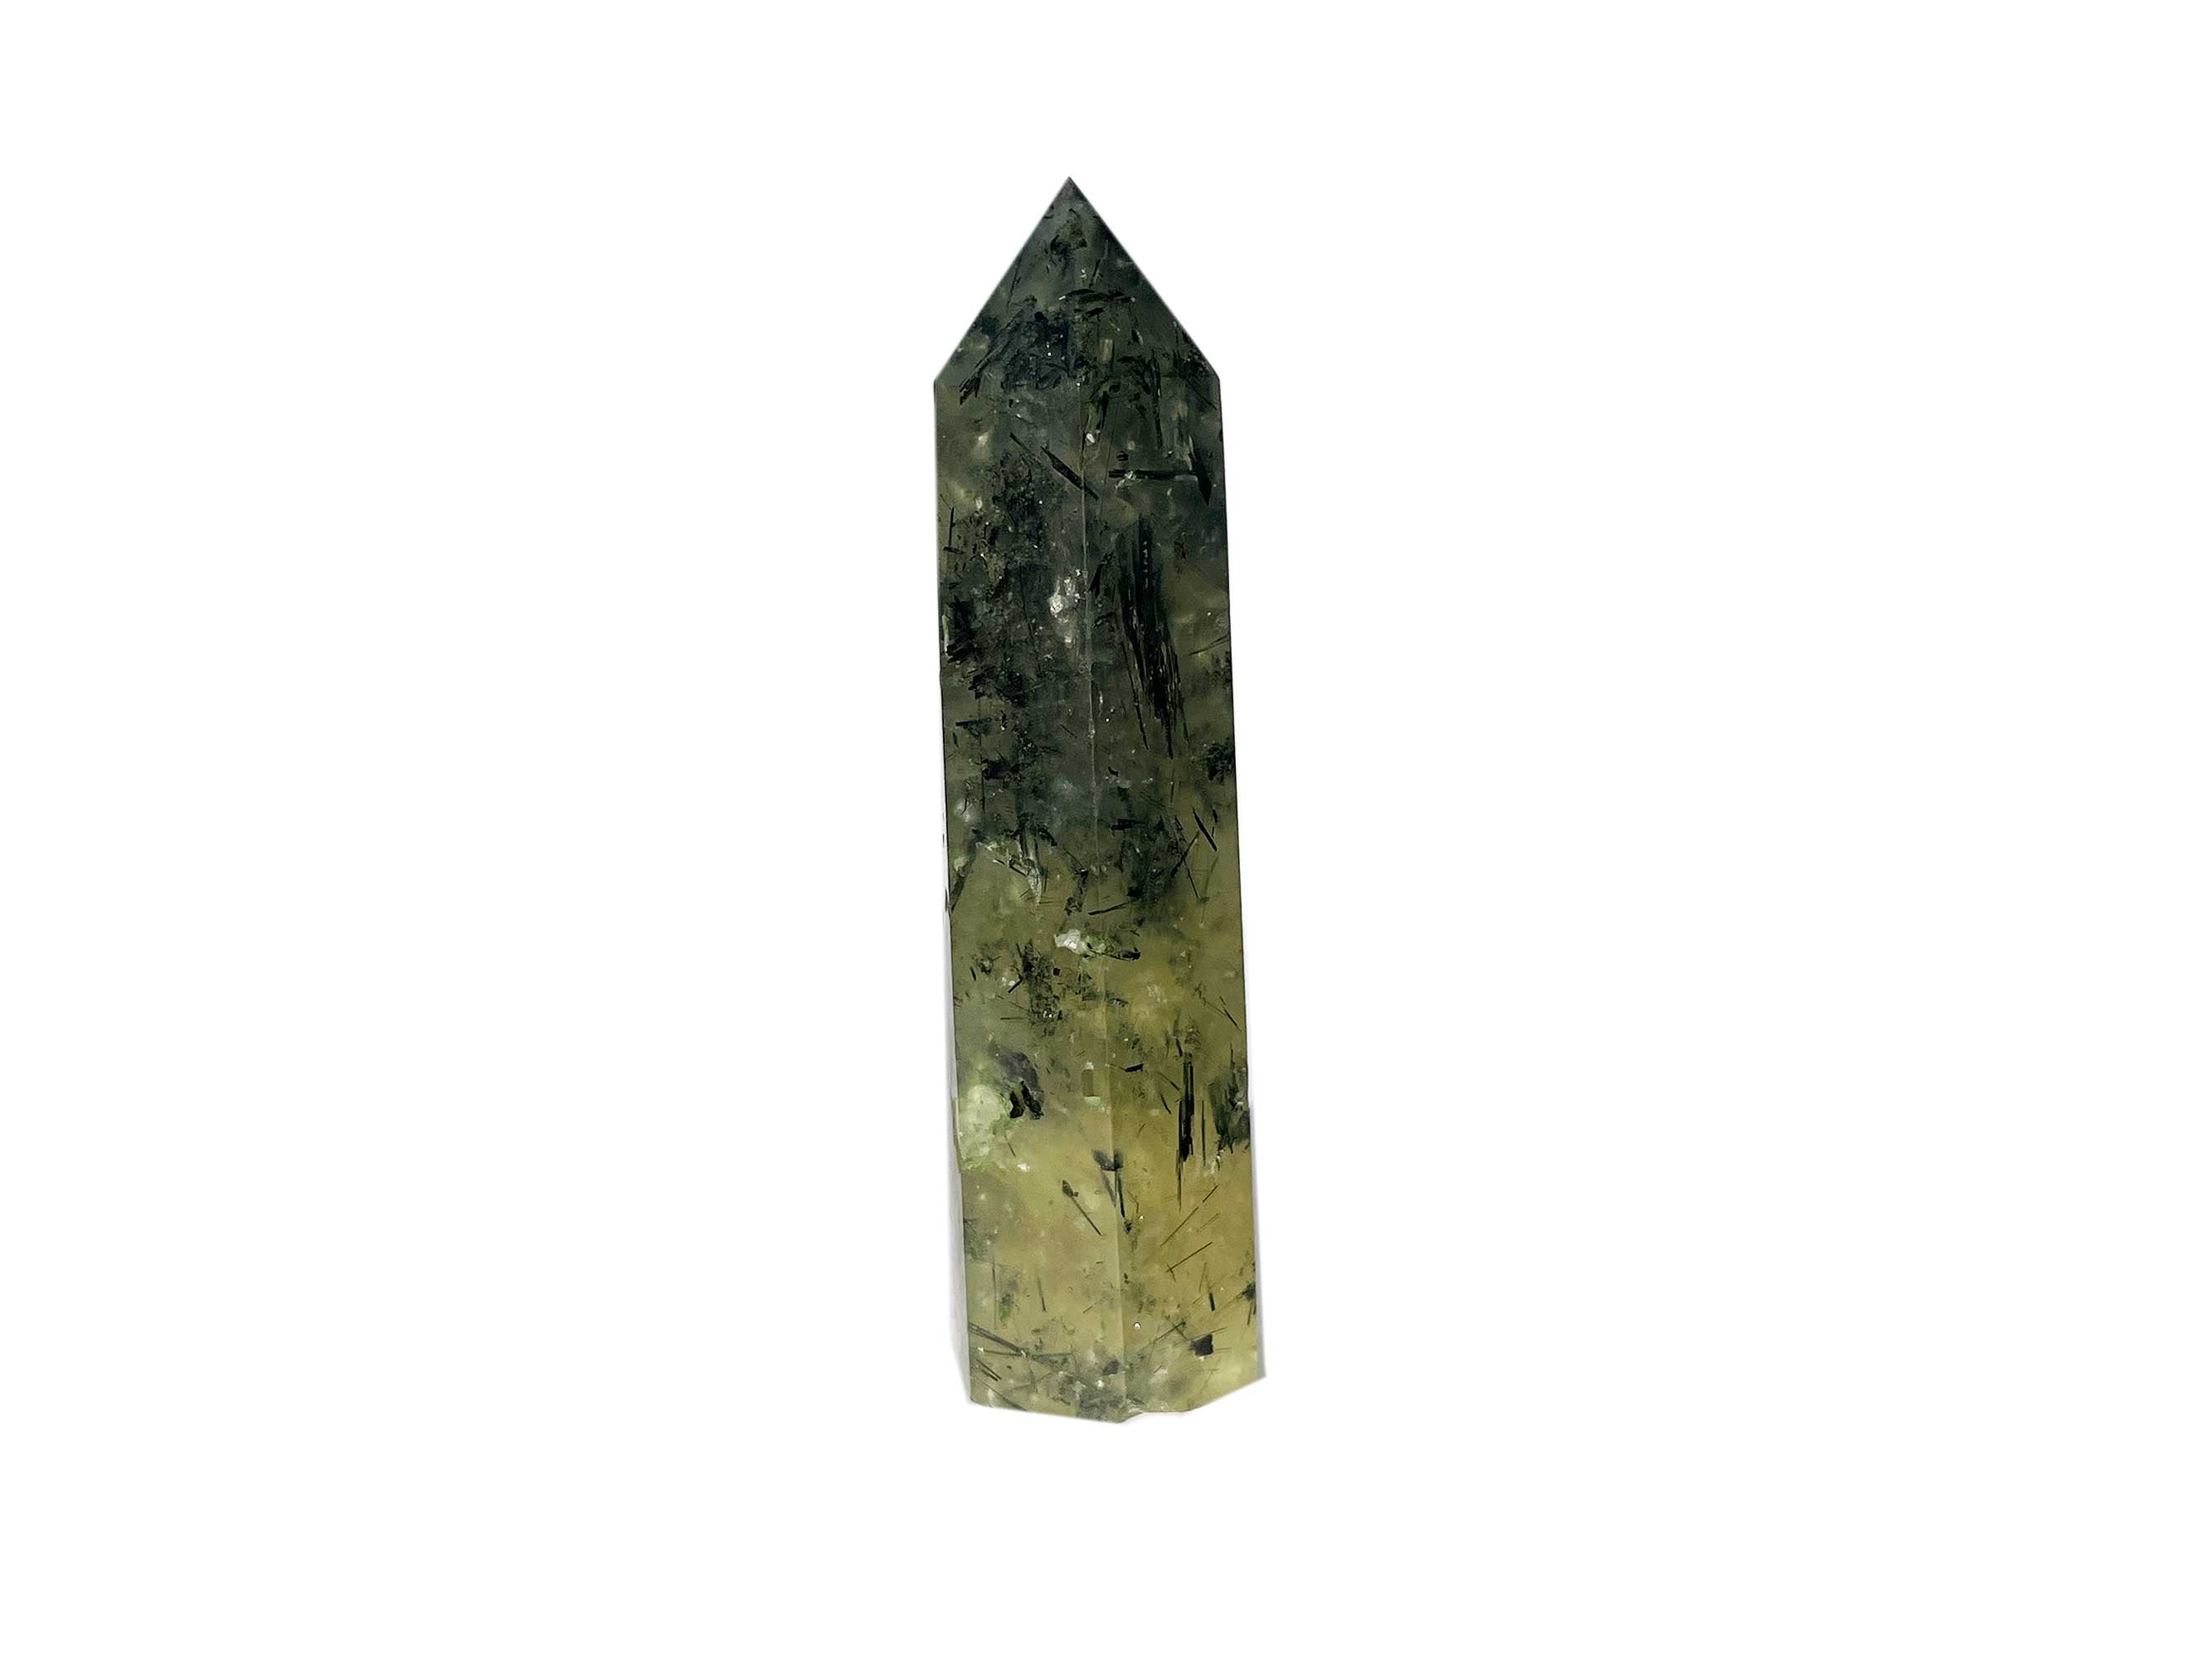 Buy Online Latest and Unique Prehnite Crystal Tower Point | Shop Best Spiritual Items - The Mystical Ritual